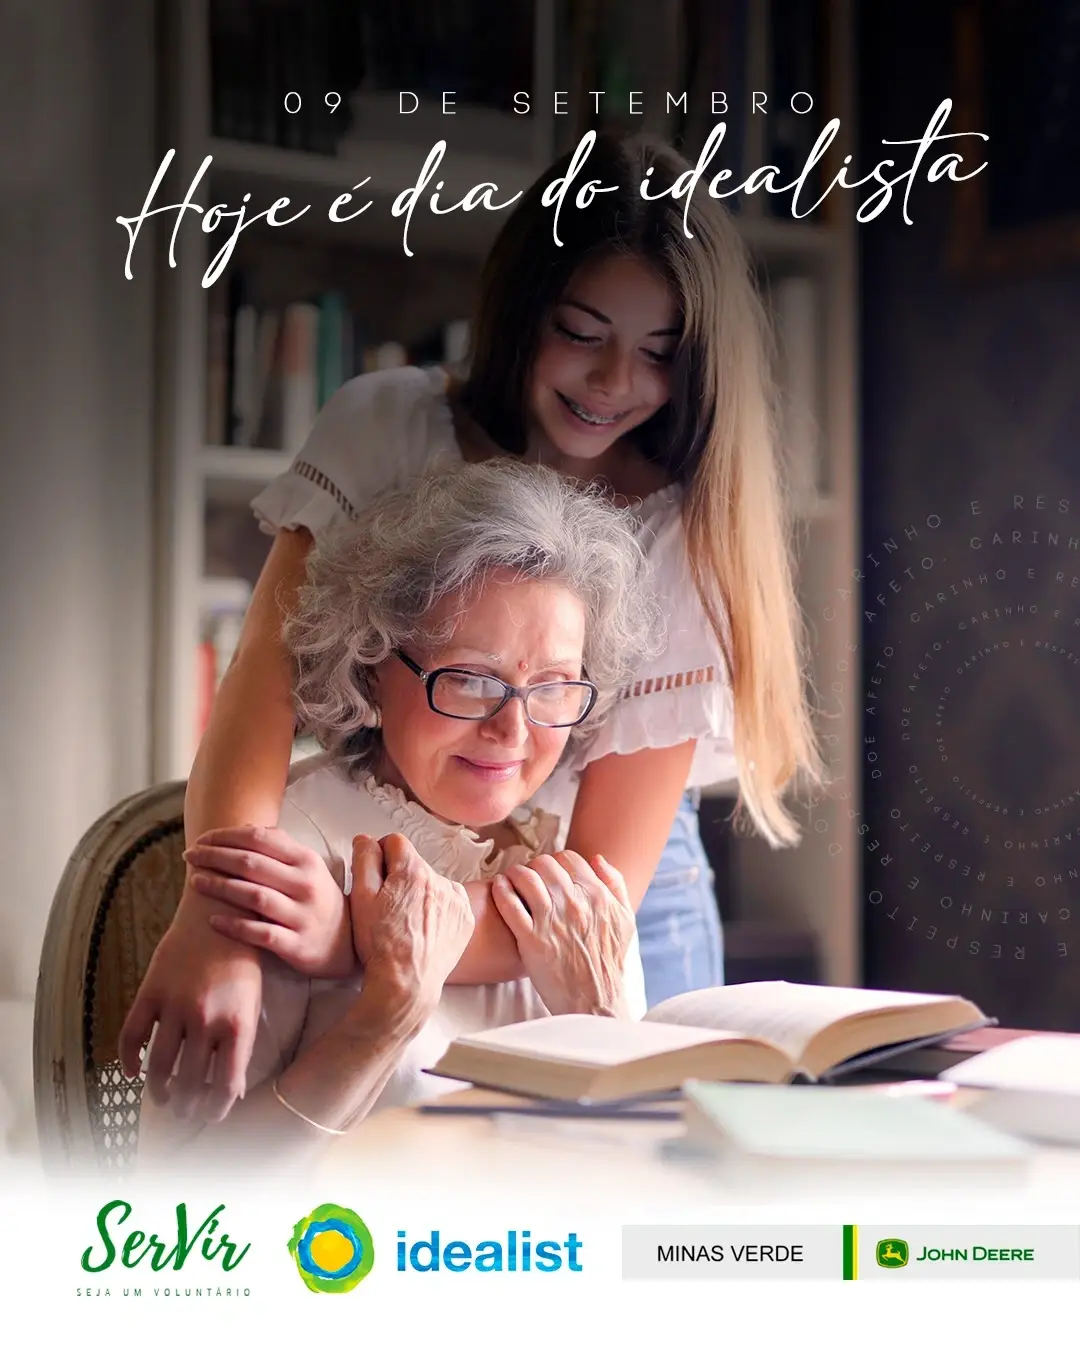 A poster of an old lady with a young girl, sitting, smiling and looking at a book.